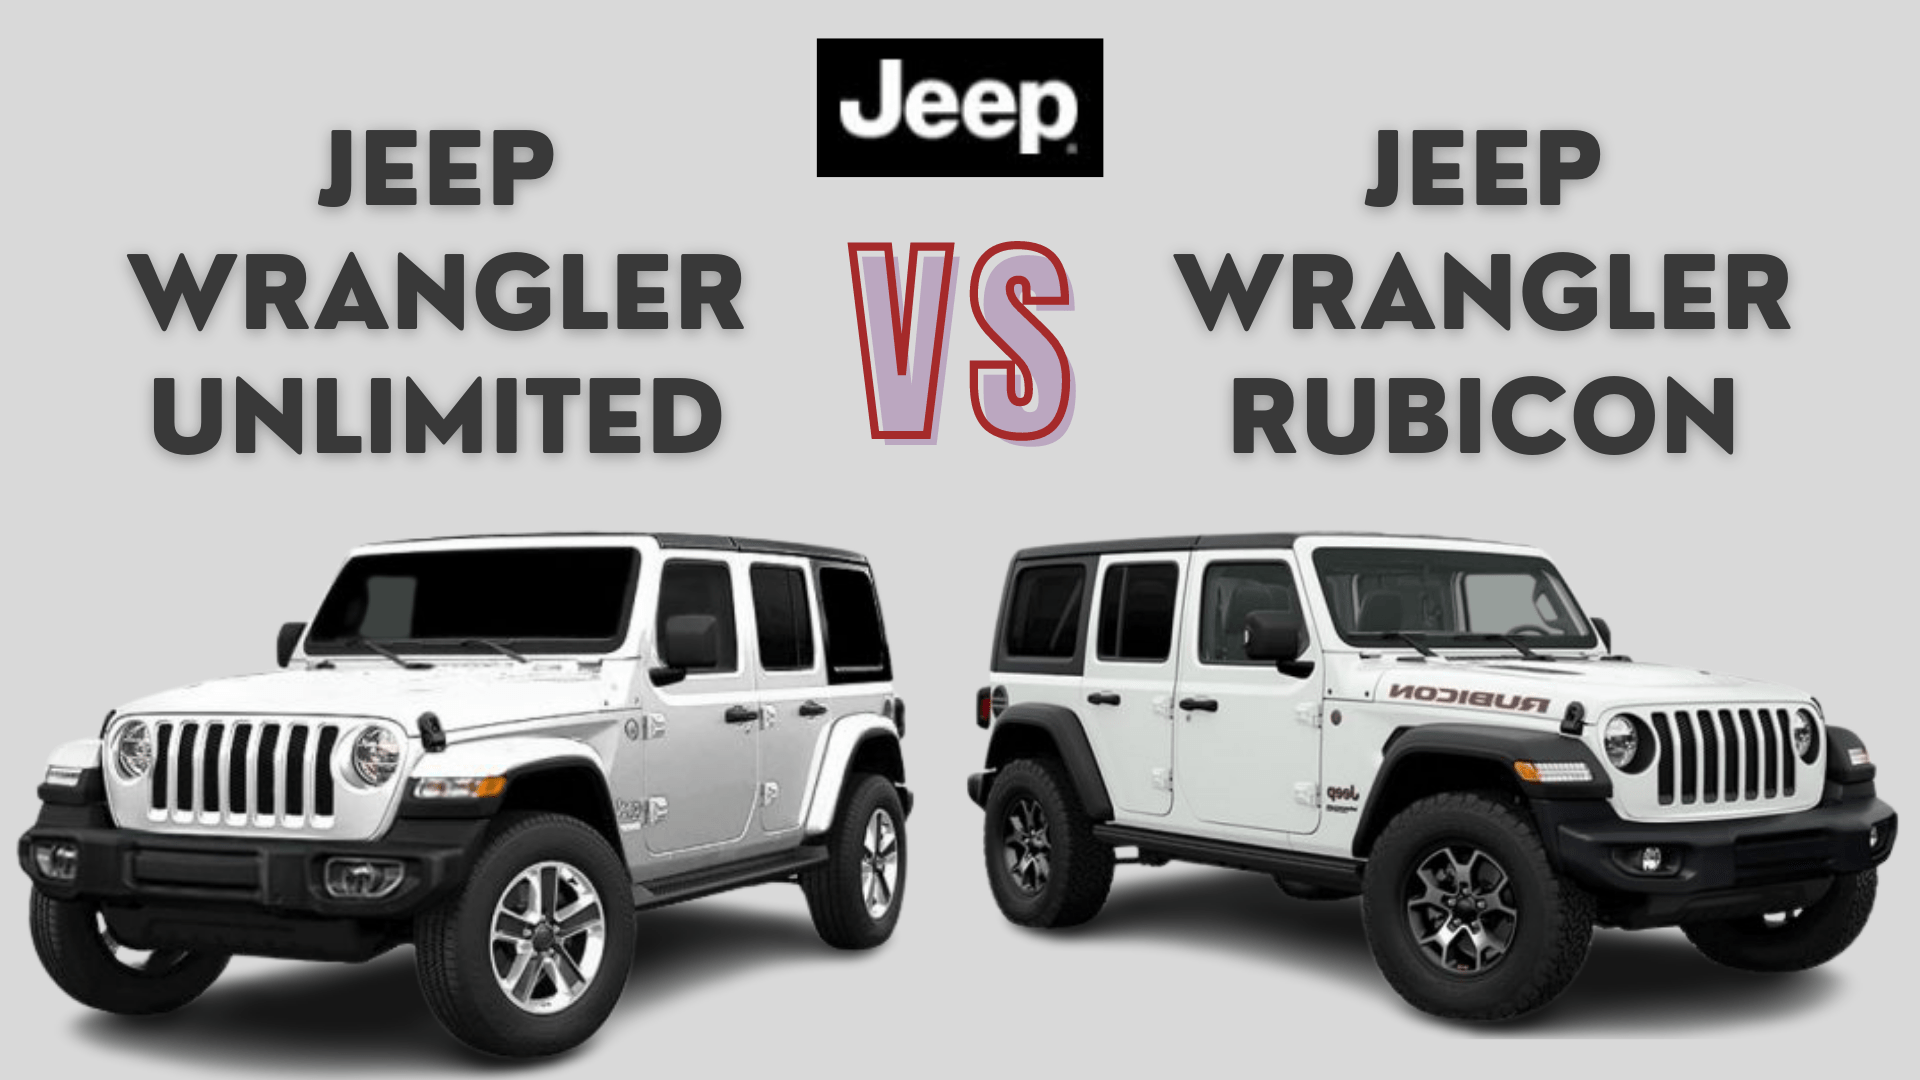 Arriba 78+ imagen what’s the difference between a rubicon and a wrangler